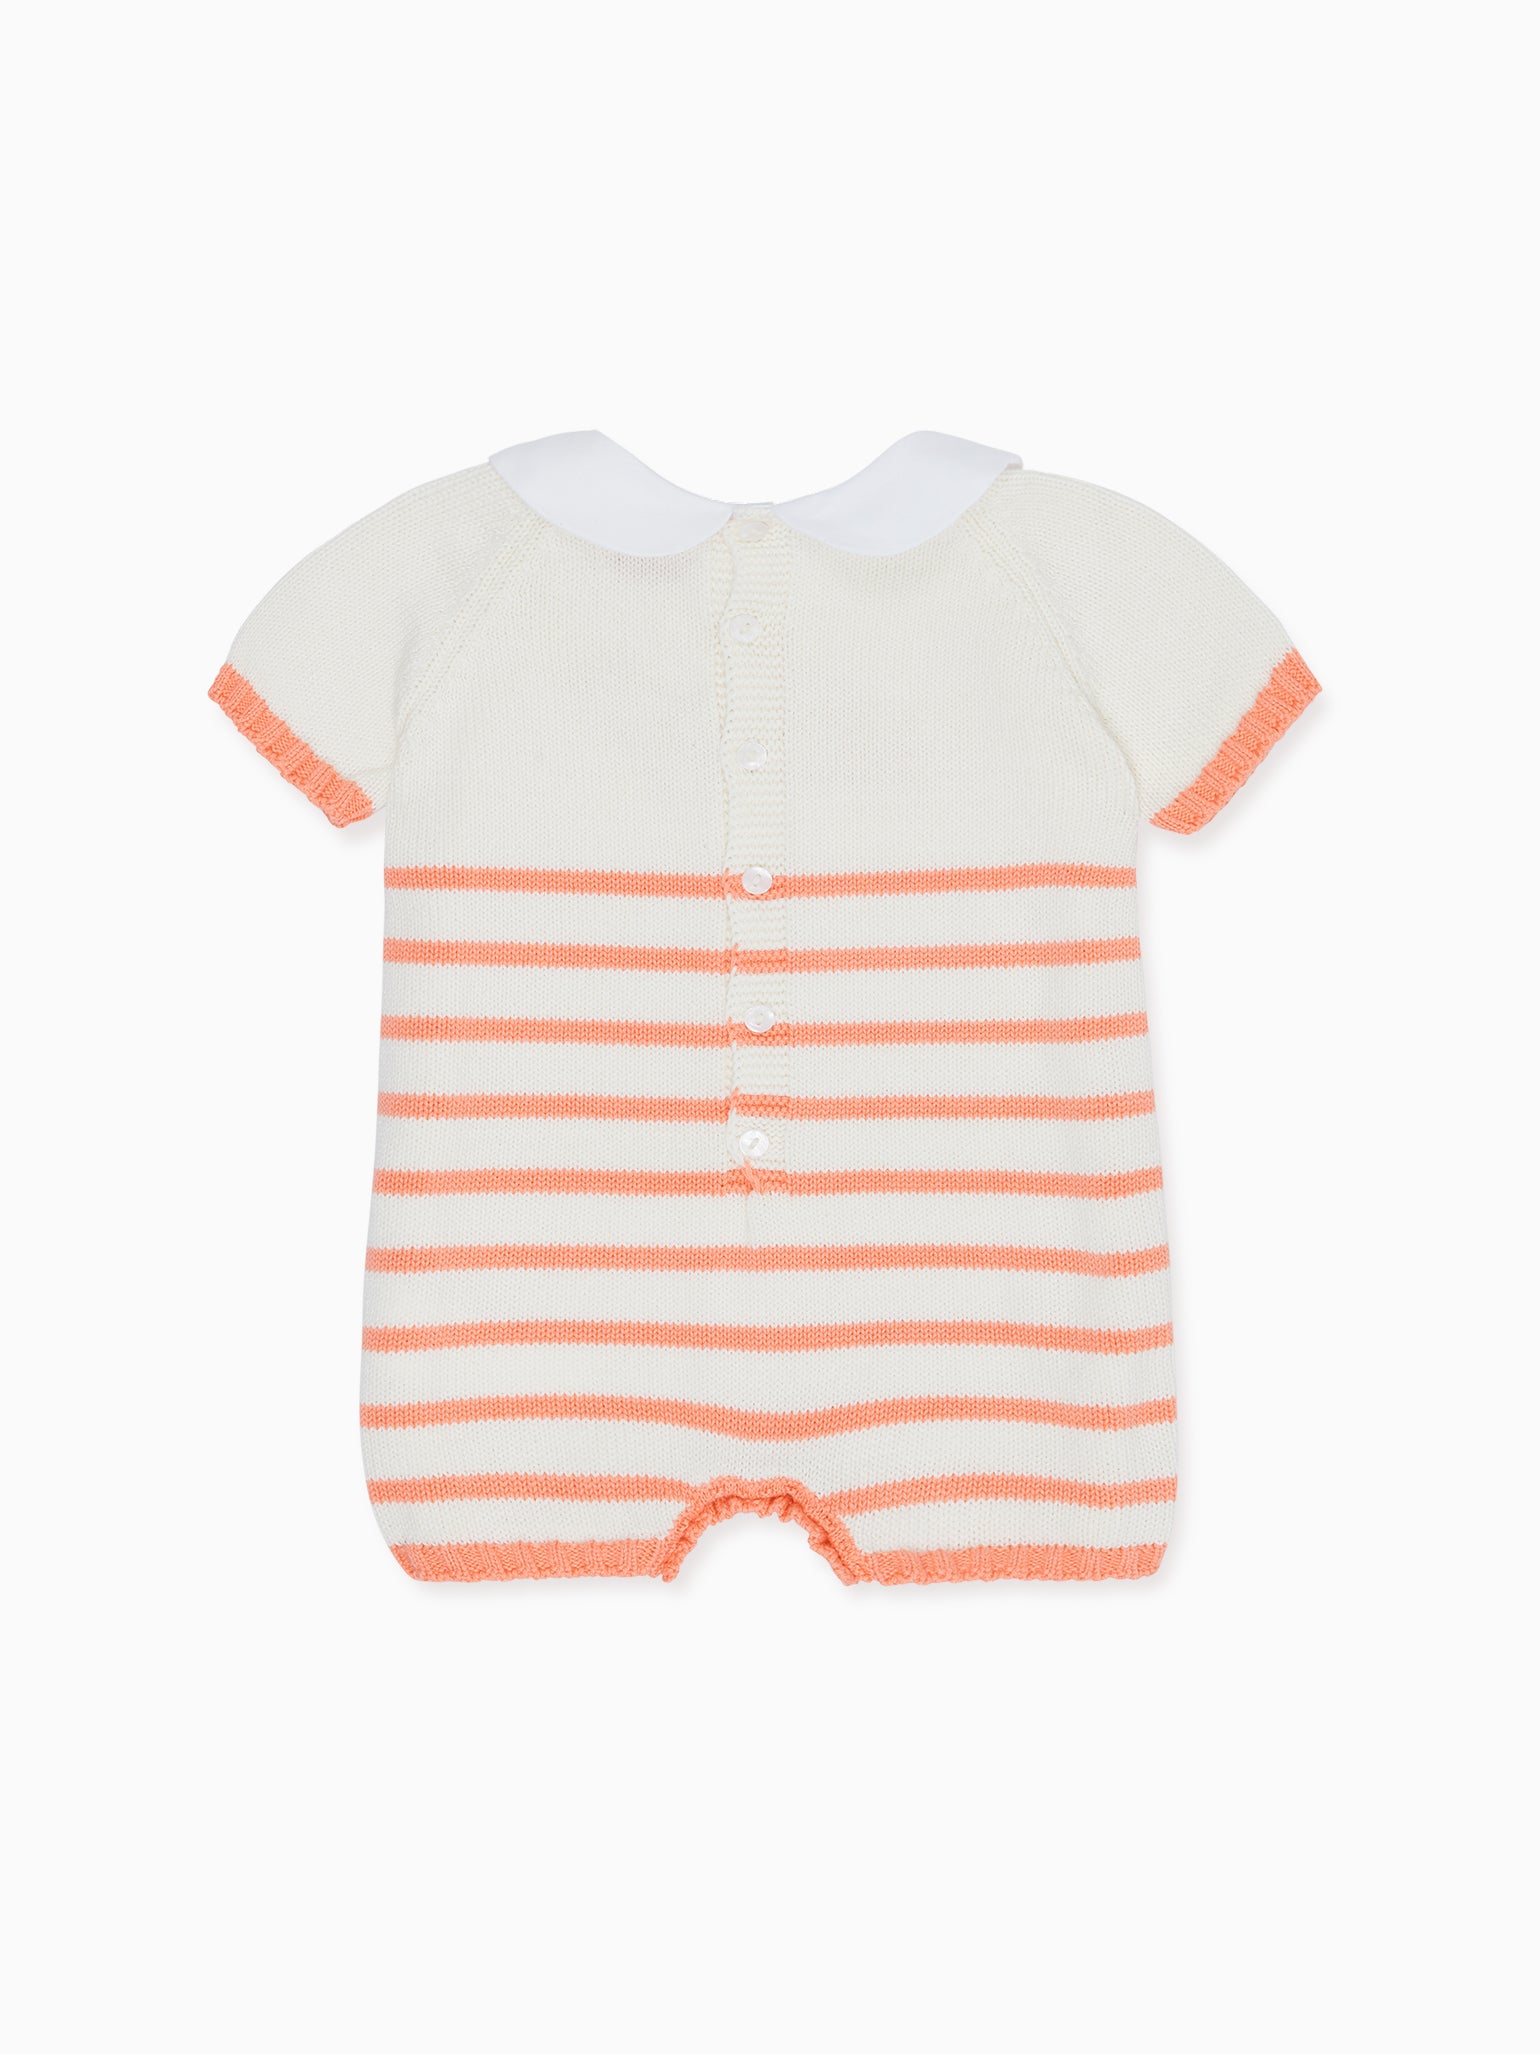 Coral Stripe Clavel Cotton Turtle Baby Knitted Playsuit